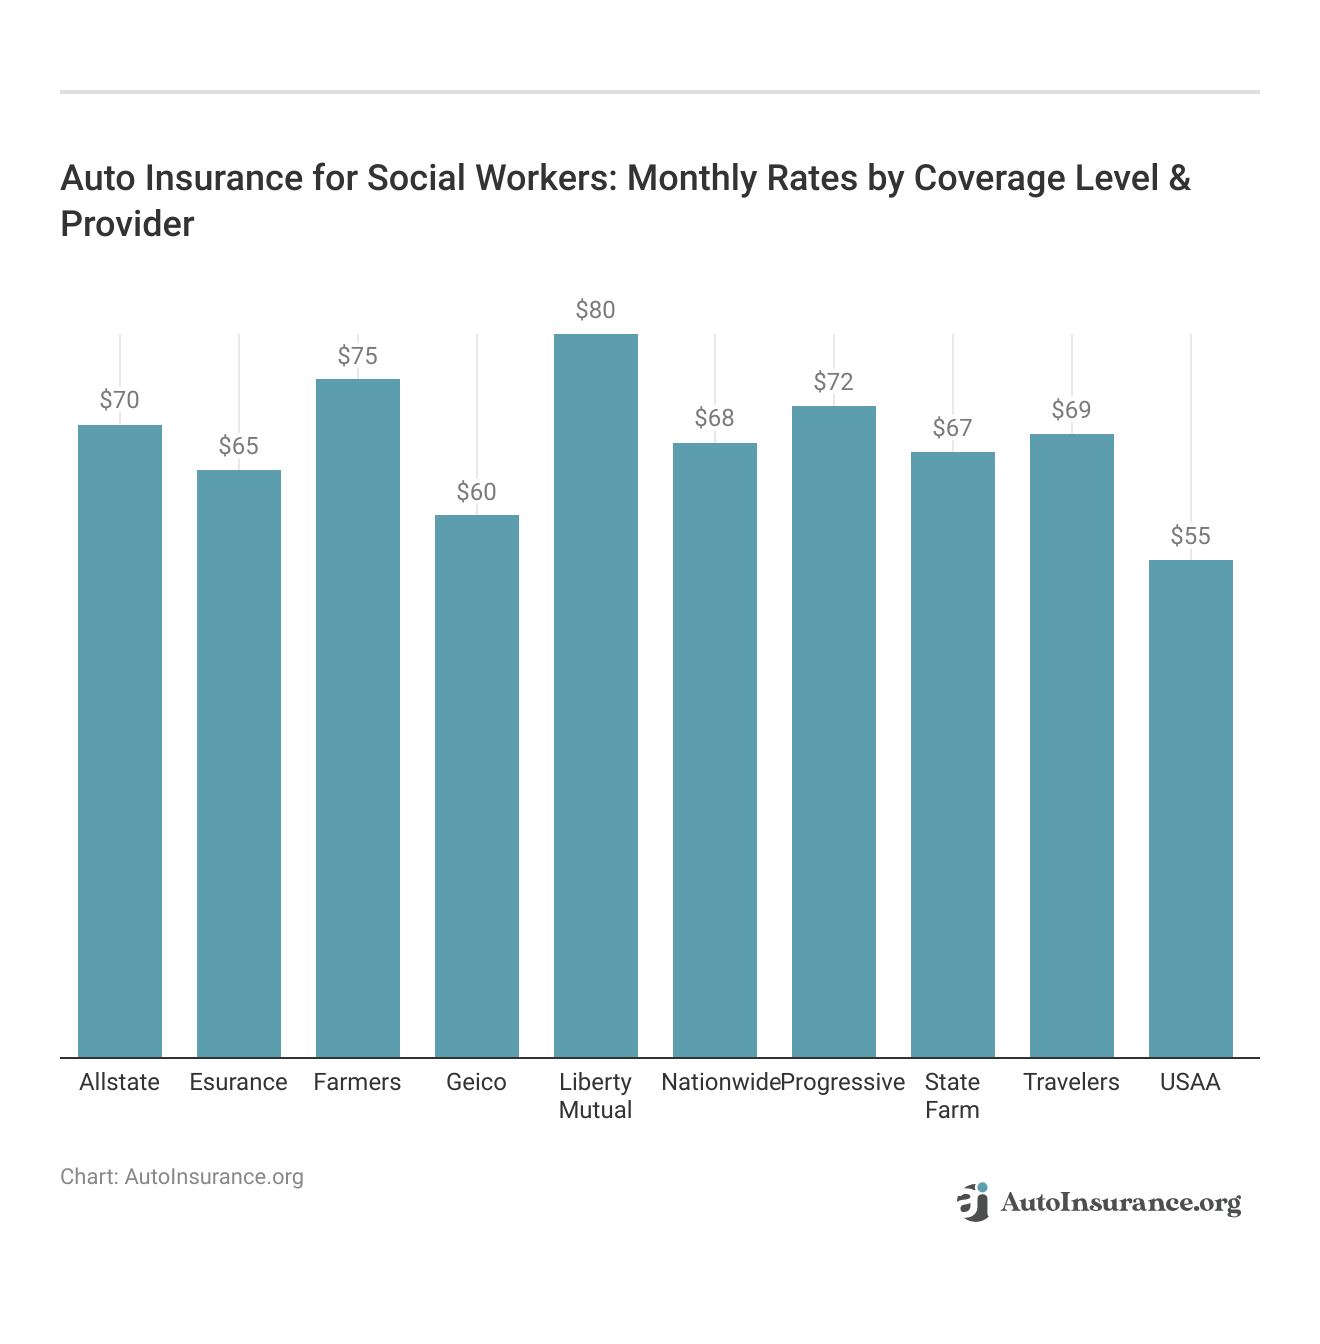 <h3>Auto Insurance for Social Workers: Monthly Rates by Coverage Level & Provider</h3>